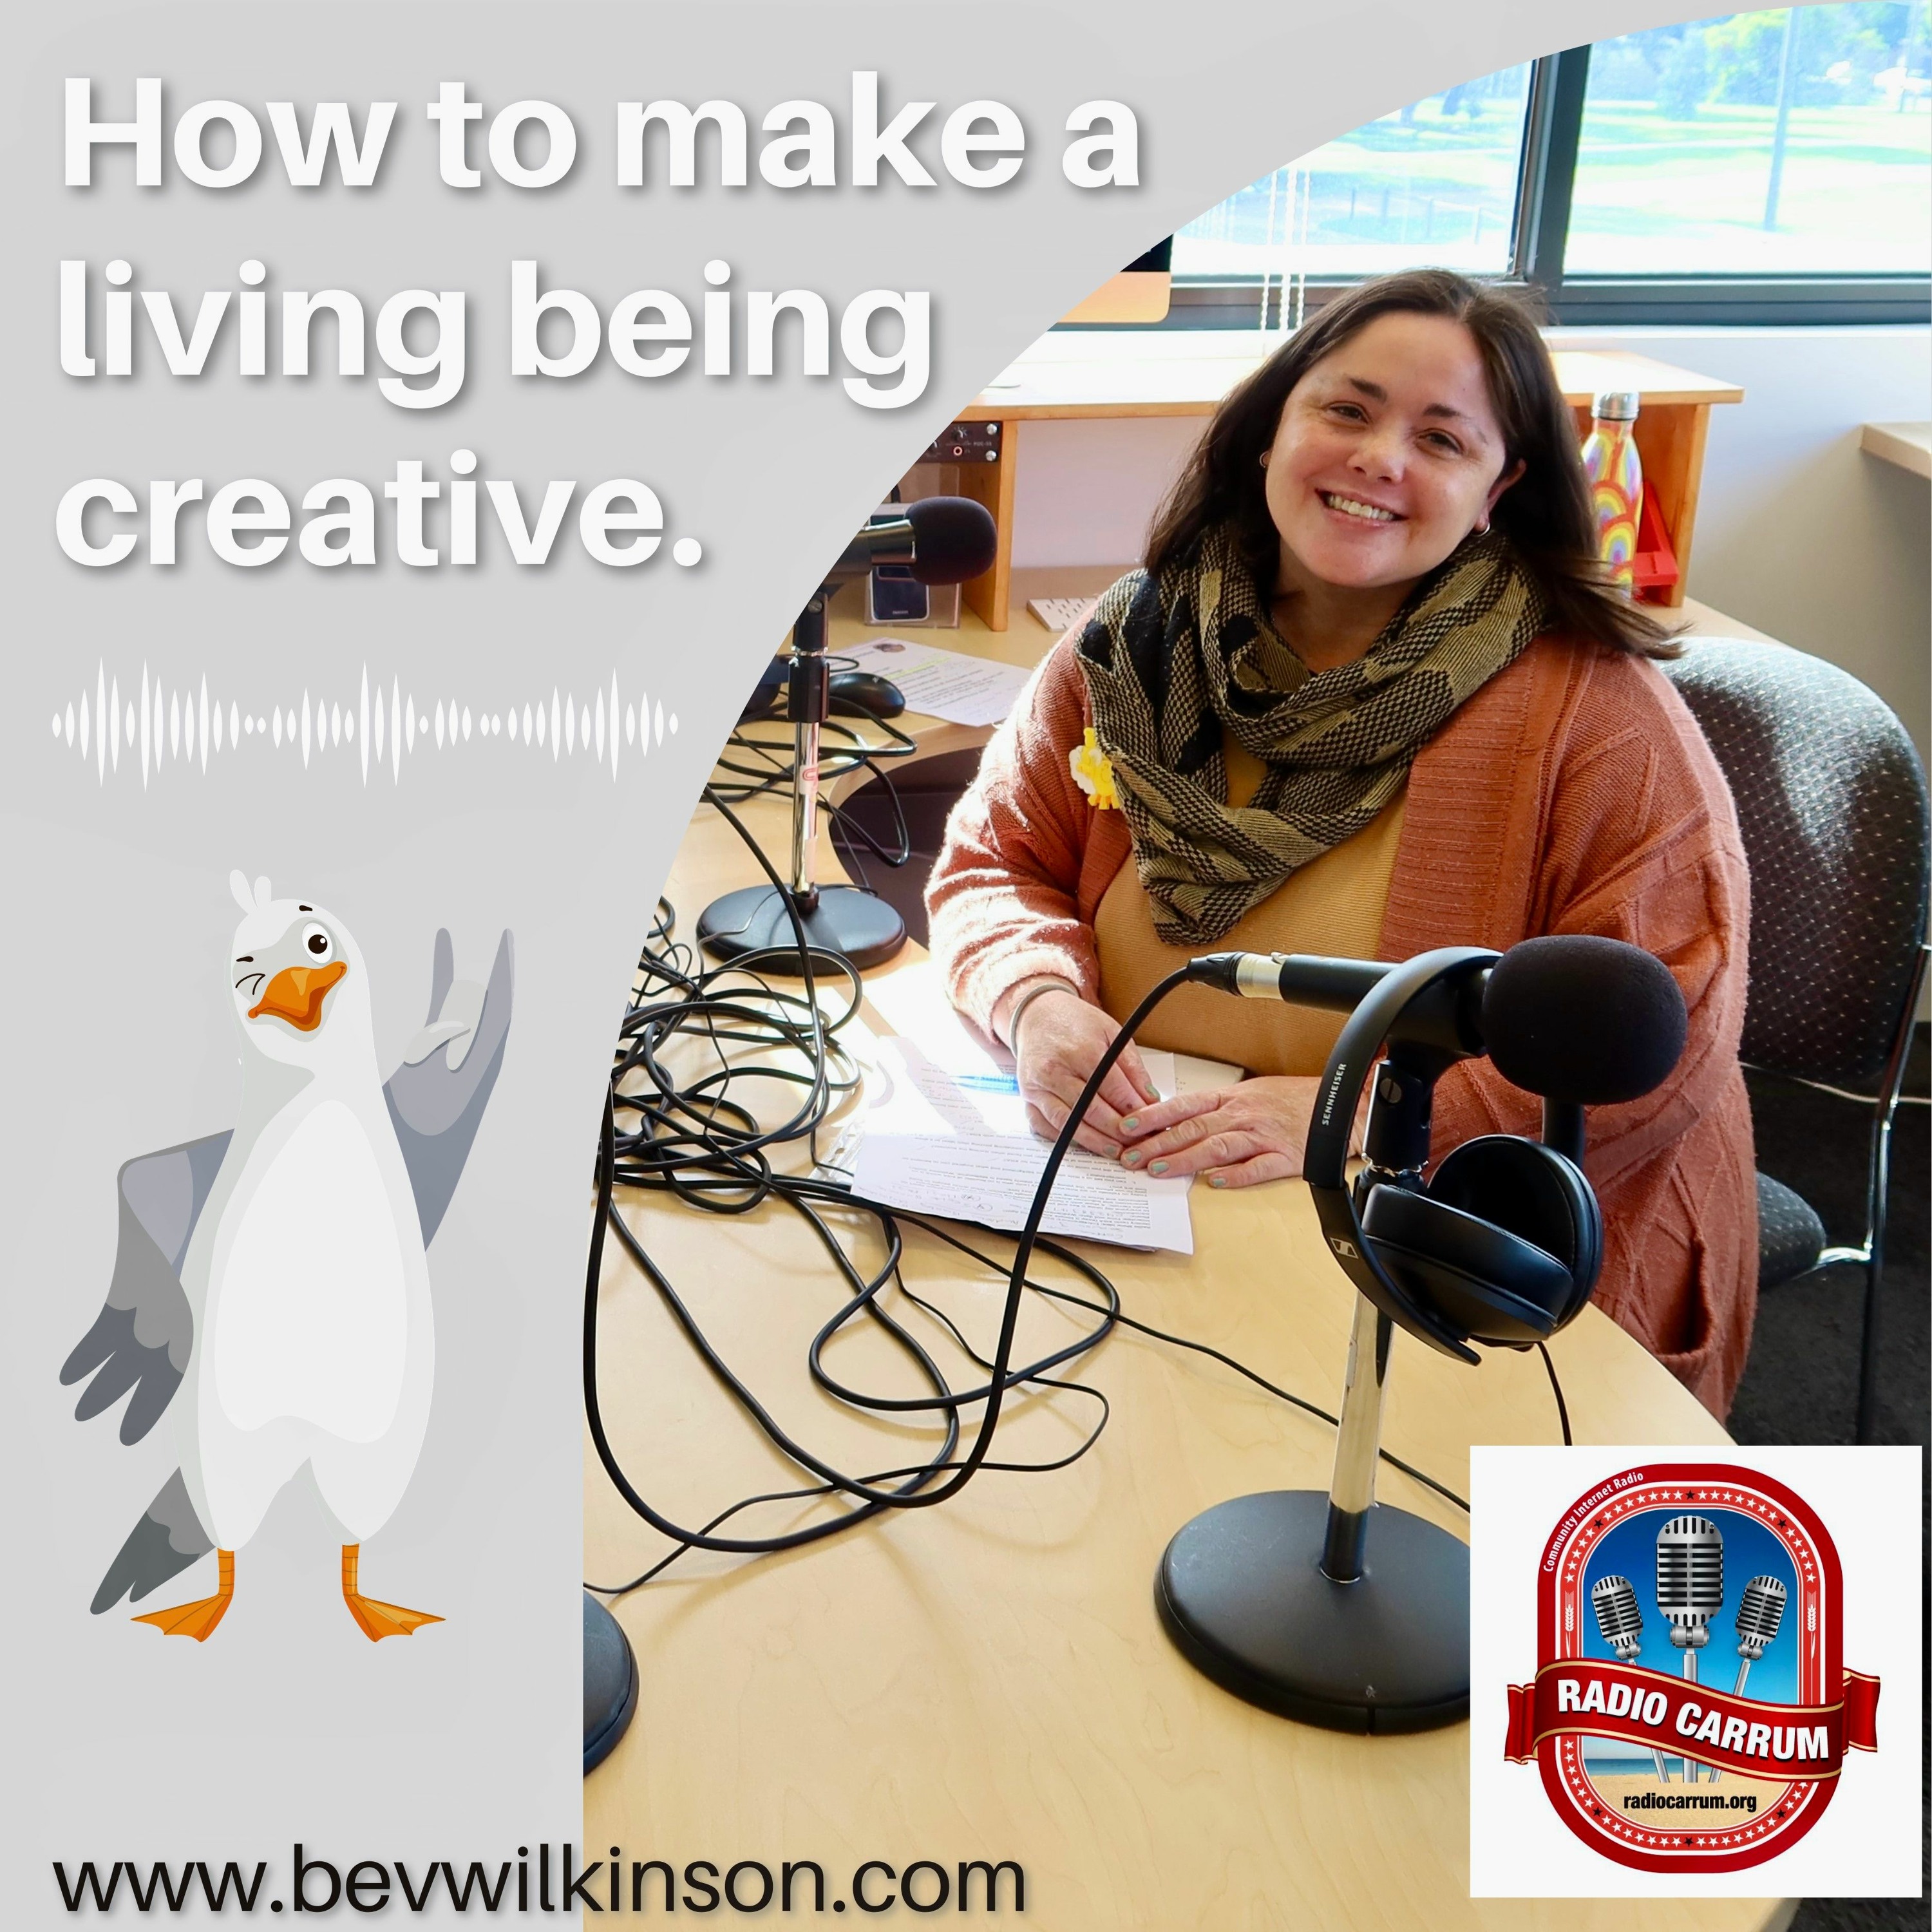 How To Make A Living Being Creative - Episode 2